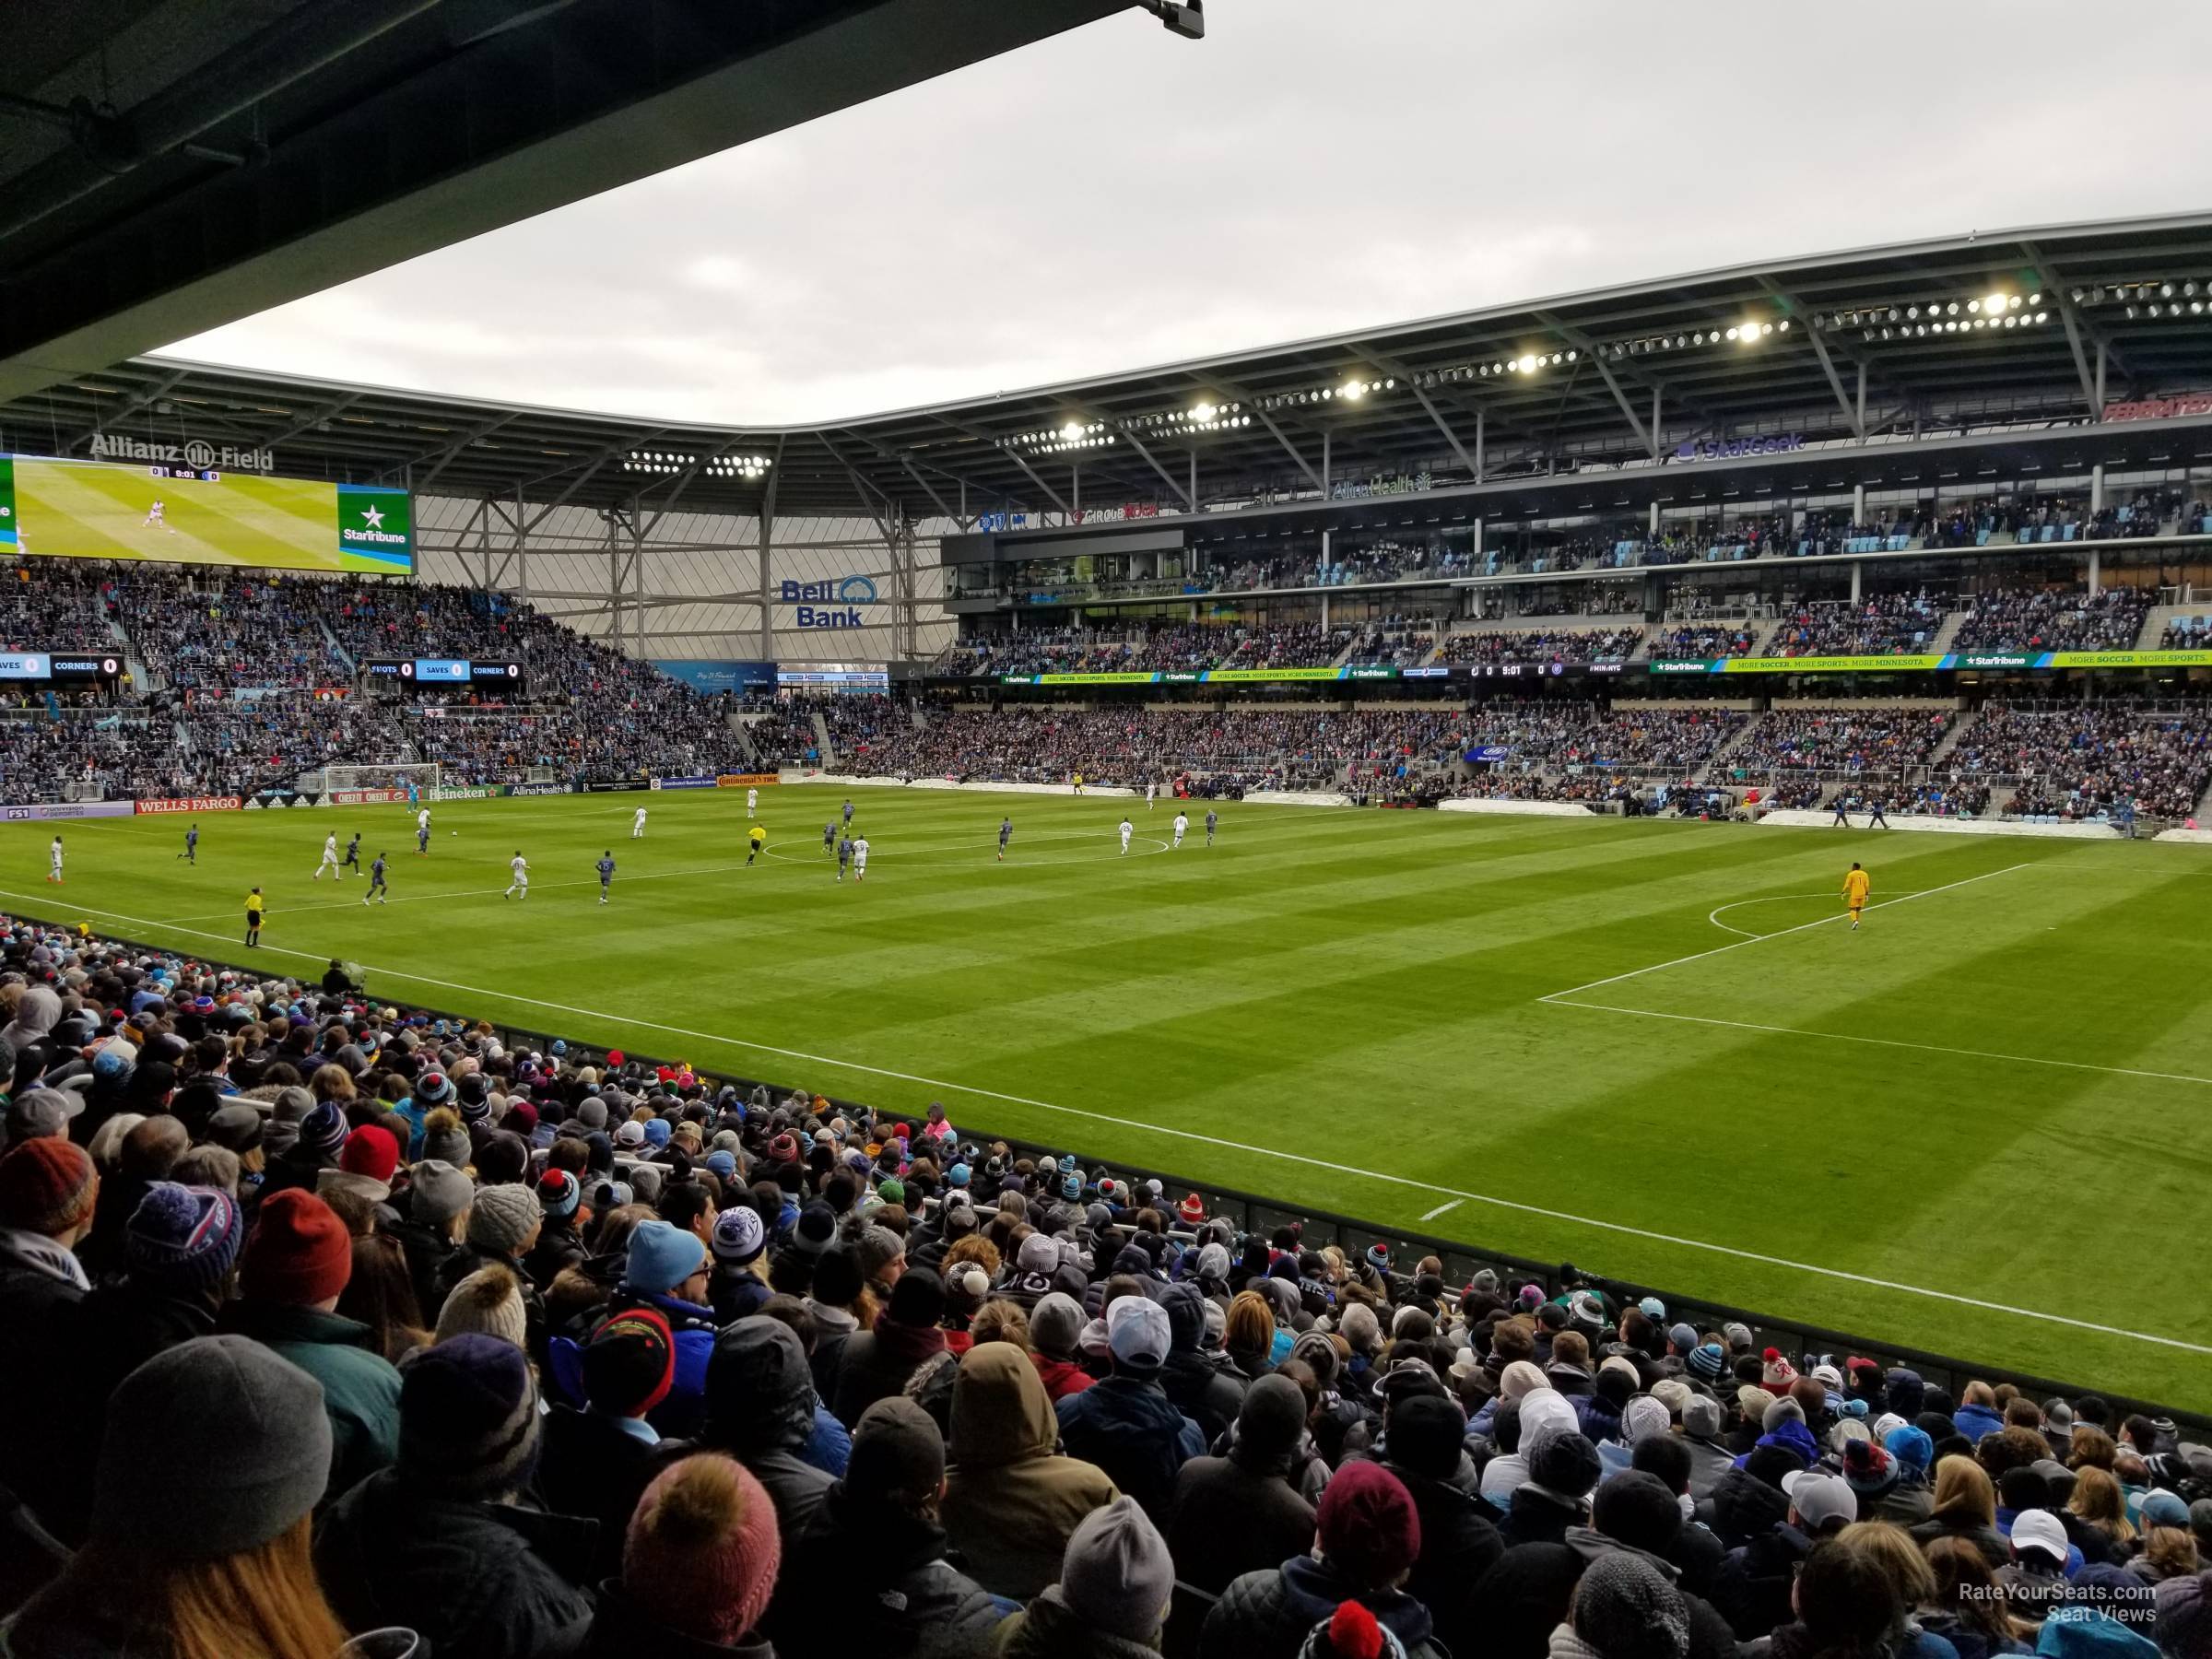 section 9, row 18 seat view  - allianz field